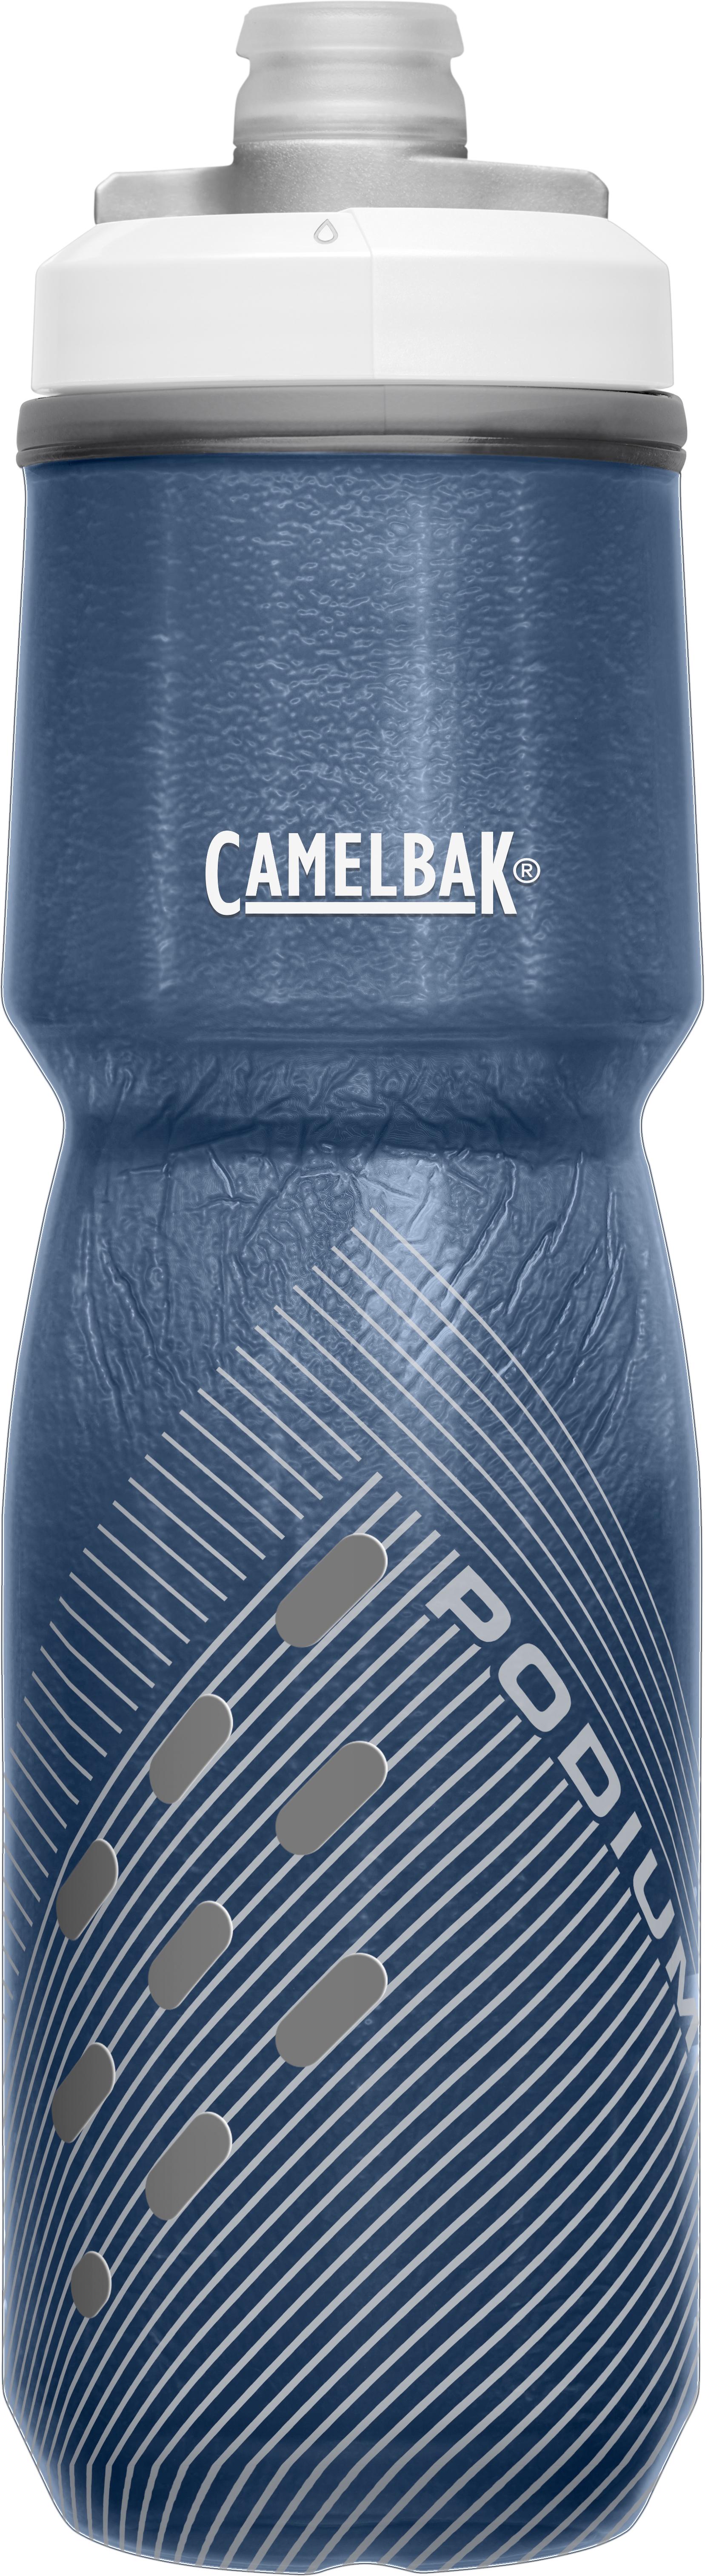 Camelbak Podium Chill Insulated Bottle 710Ml 2020: Navy Perforated 710Ml/24Oz